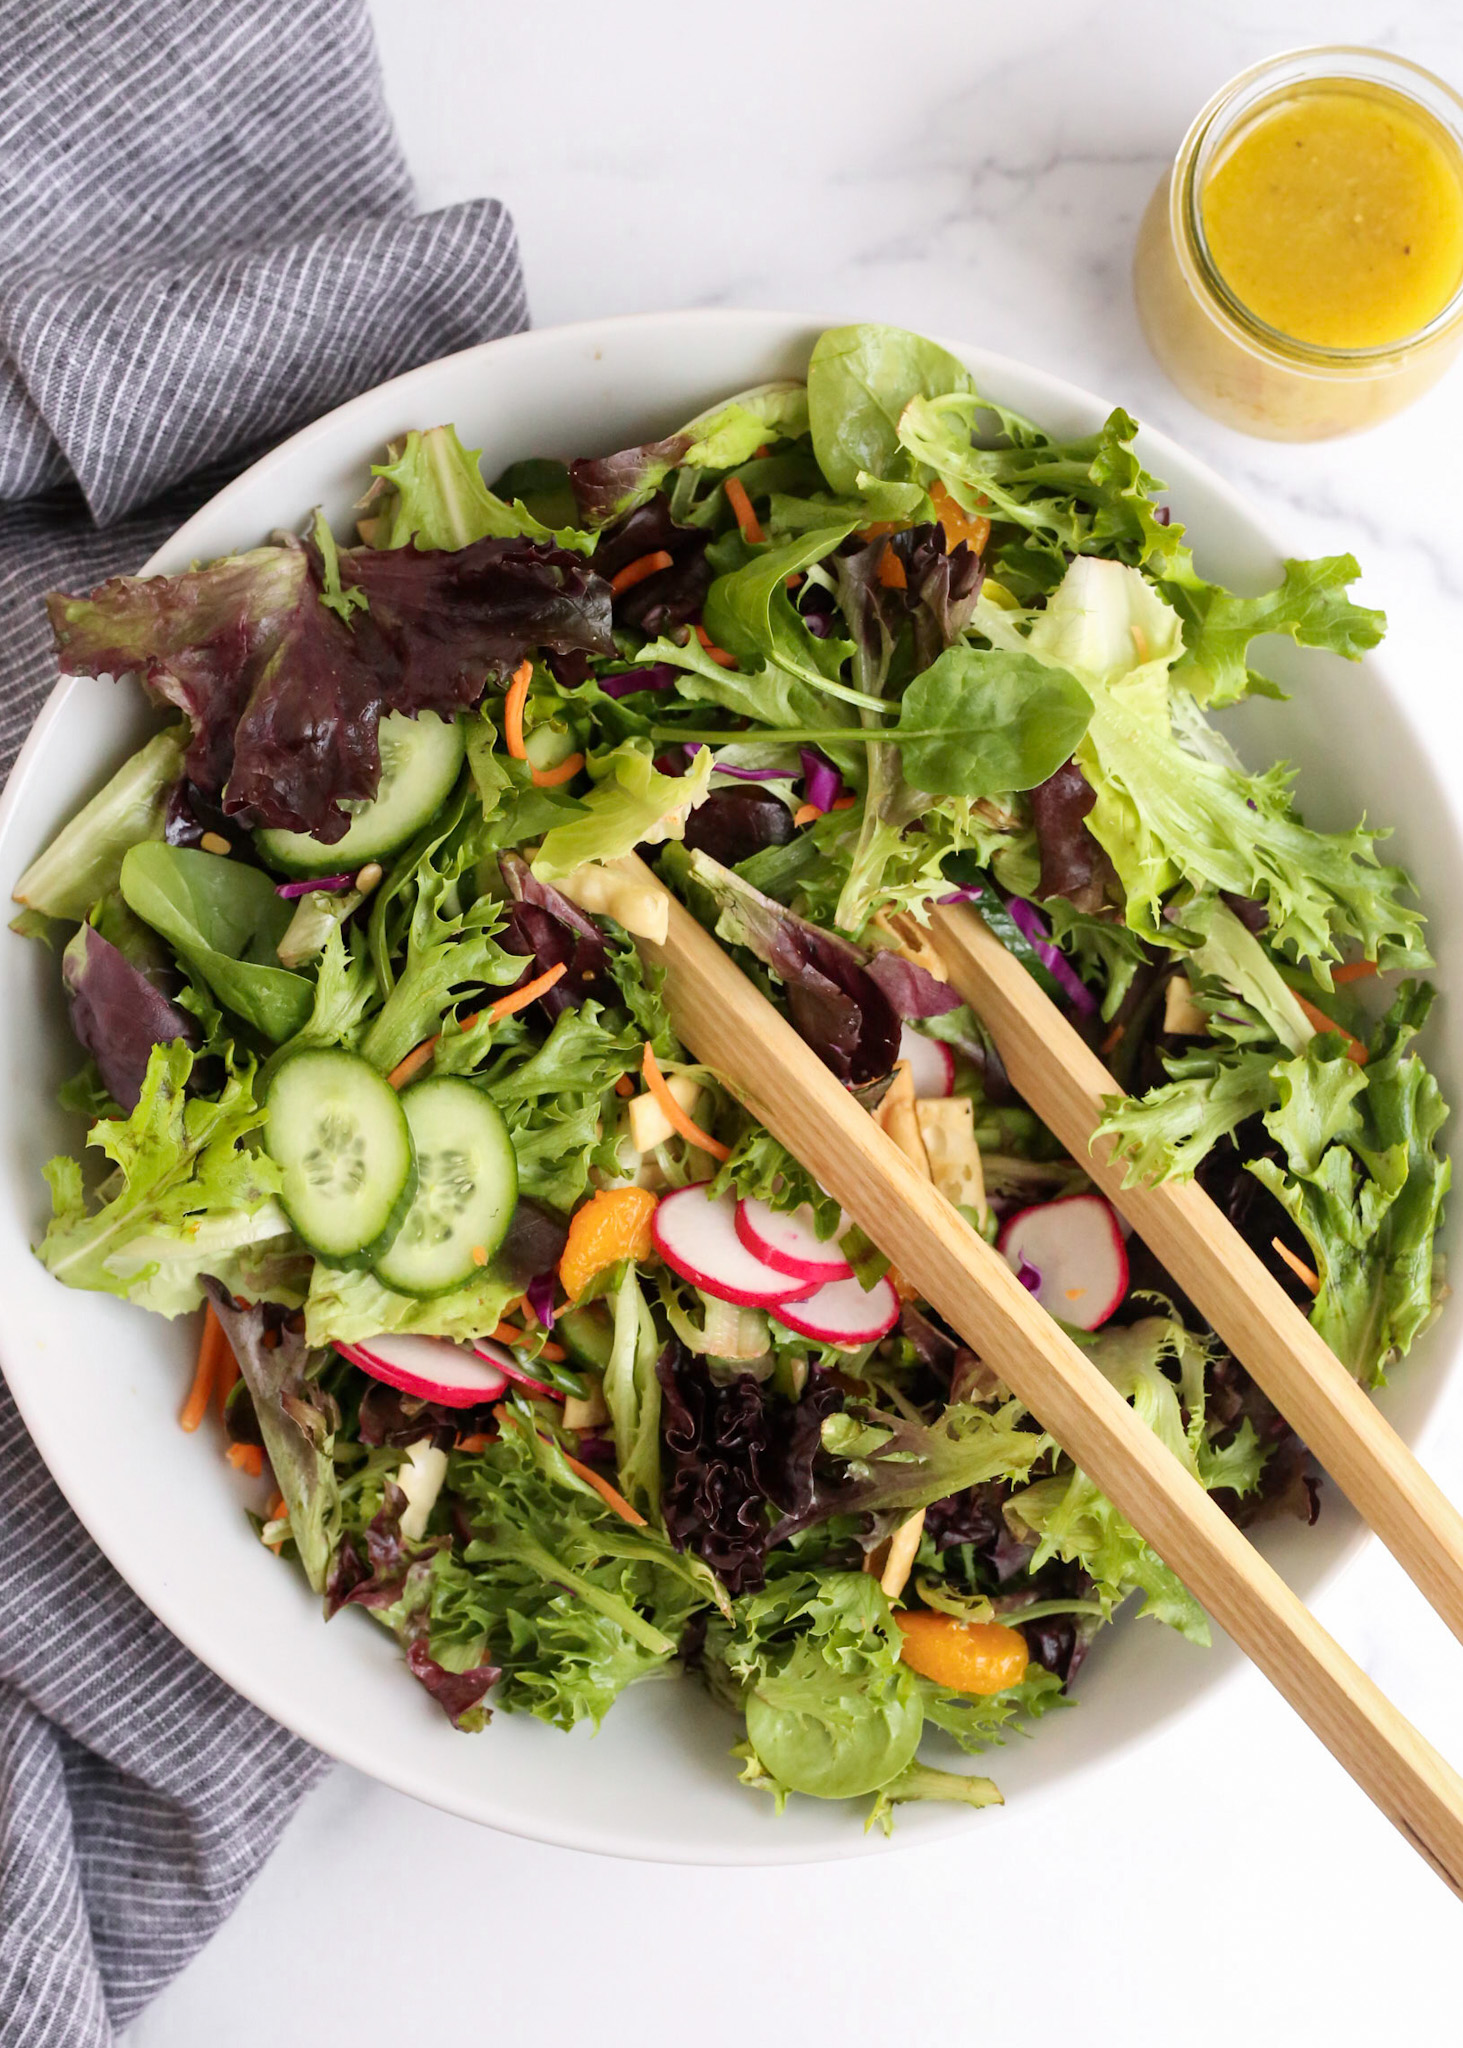 Overhead view of a mixed greens salad in a large white serving bowl with wooden salad tongs set on the side of the bowl. A blue striped linen and small jar of yuzu salad dressing are included nearby